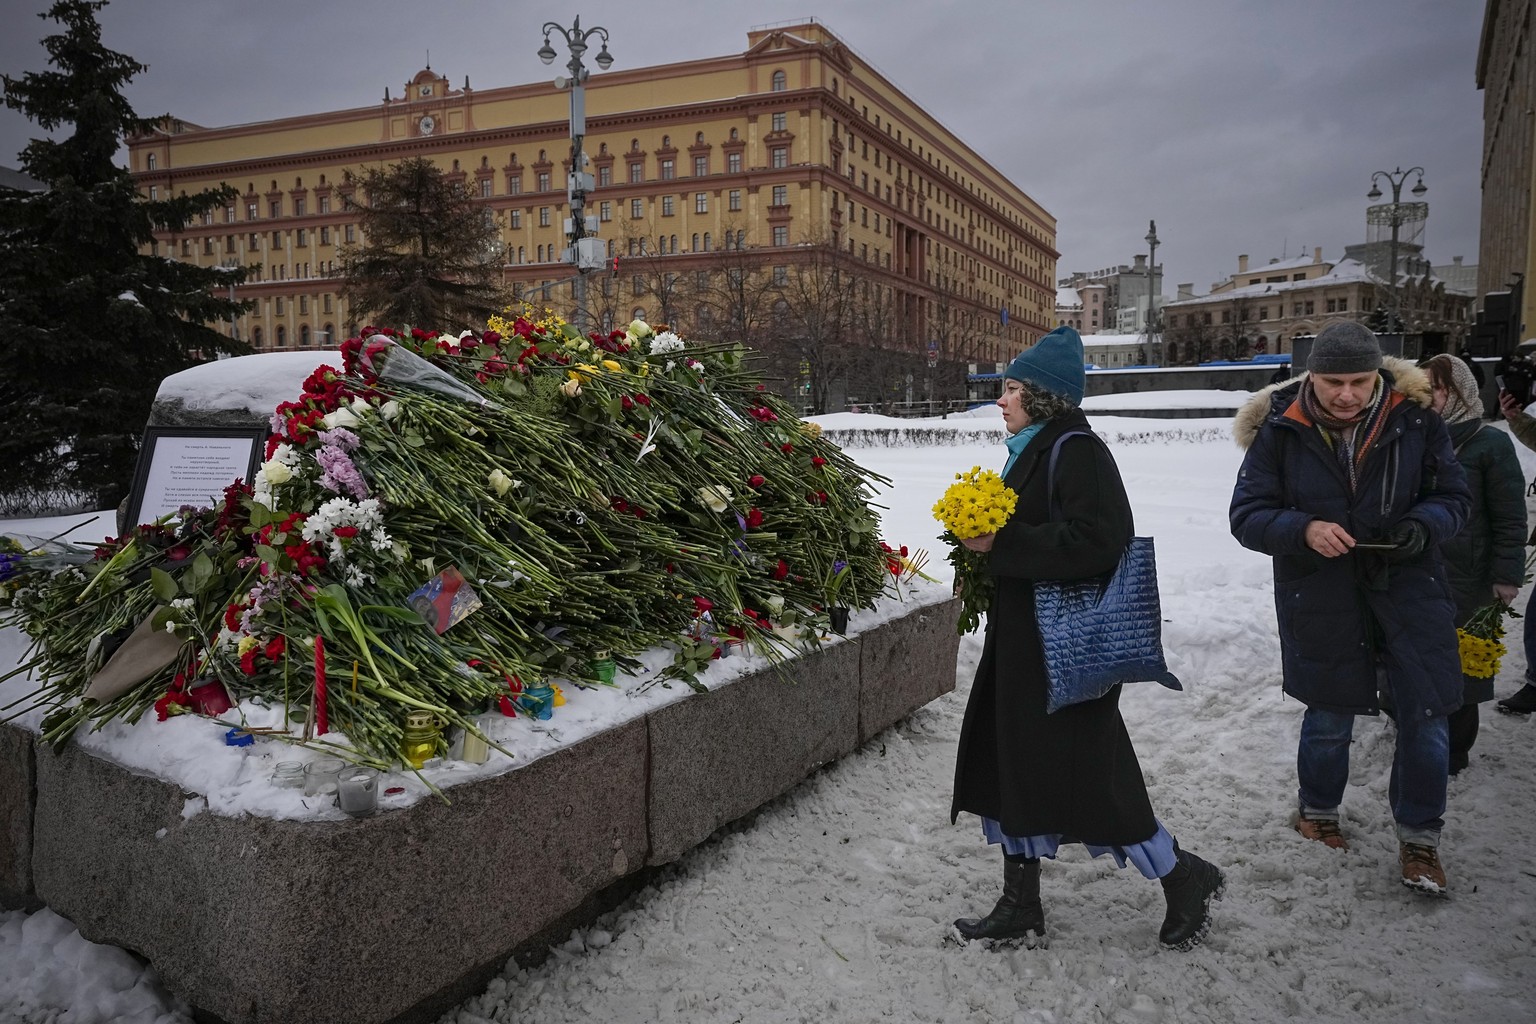 People lay flowers paying the last respect to Alexei Navalny at the monument, a large boulder from the Solovetsky islands, where the first camp of the Gulag political prison system was established, wi ...